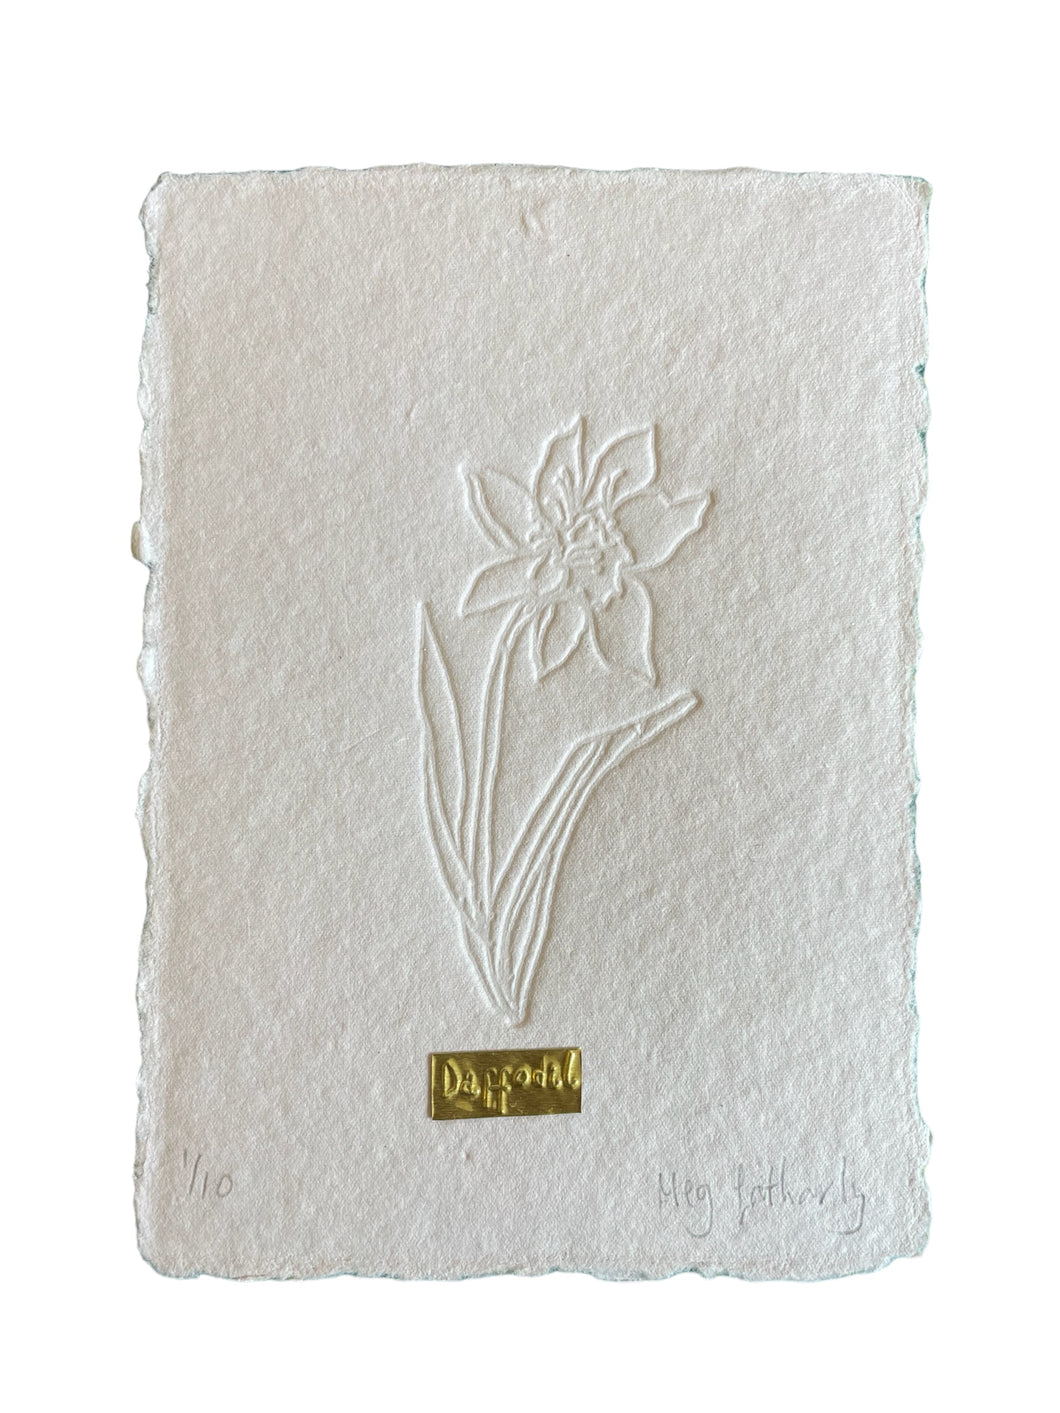 Limited Edition Daffodil Embossing and Tin on Handmade Paper - Flower of the month March